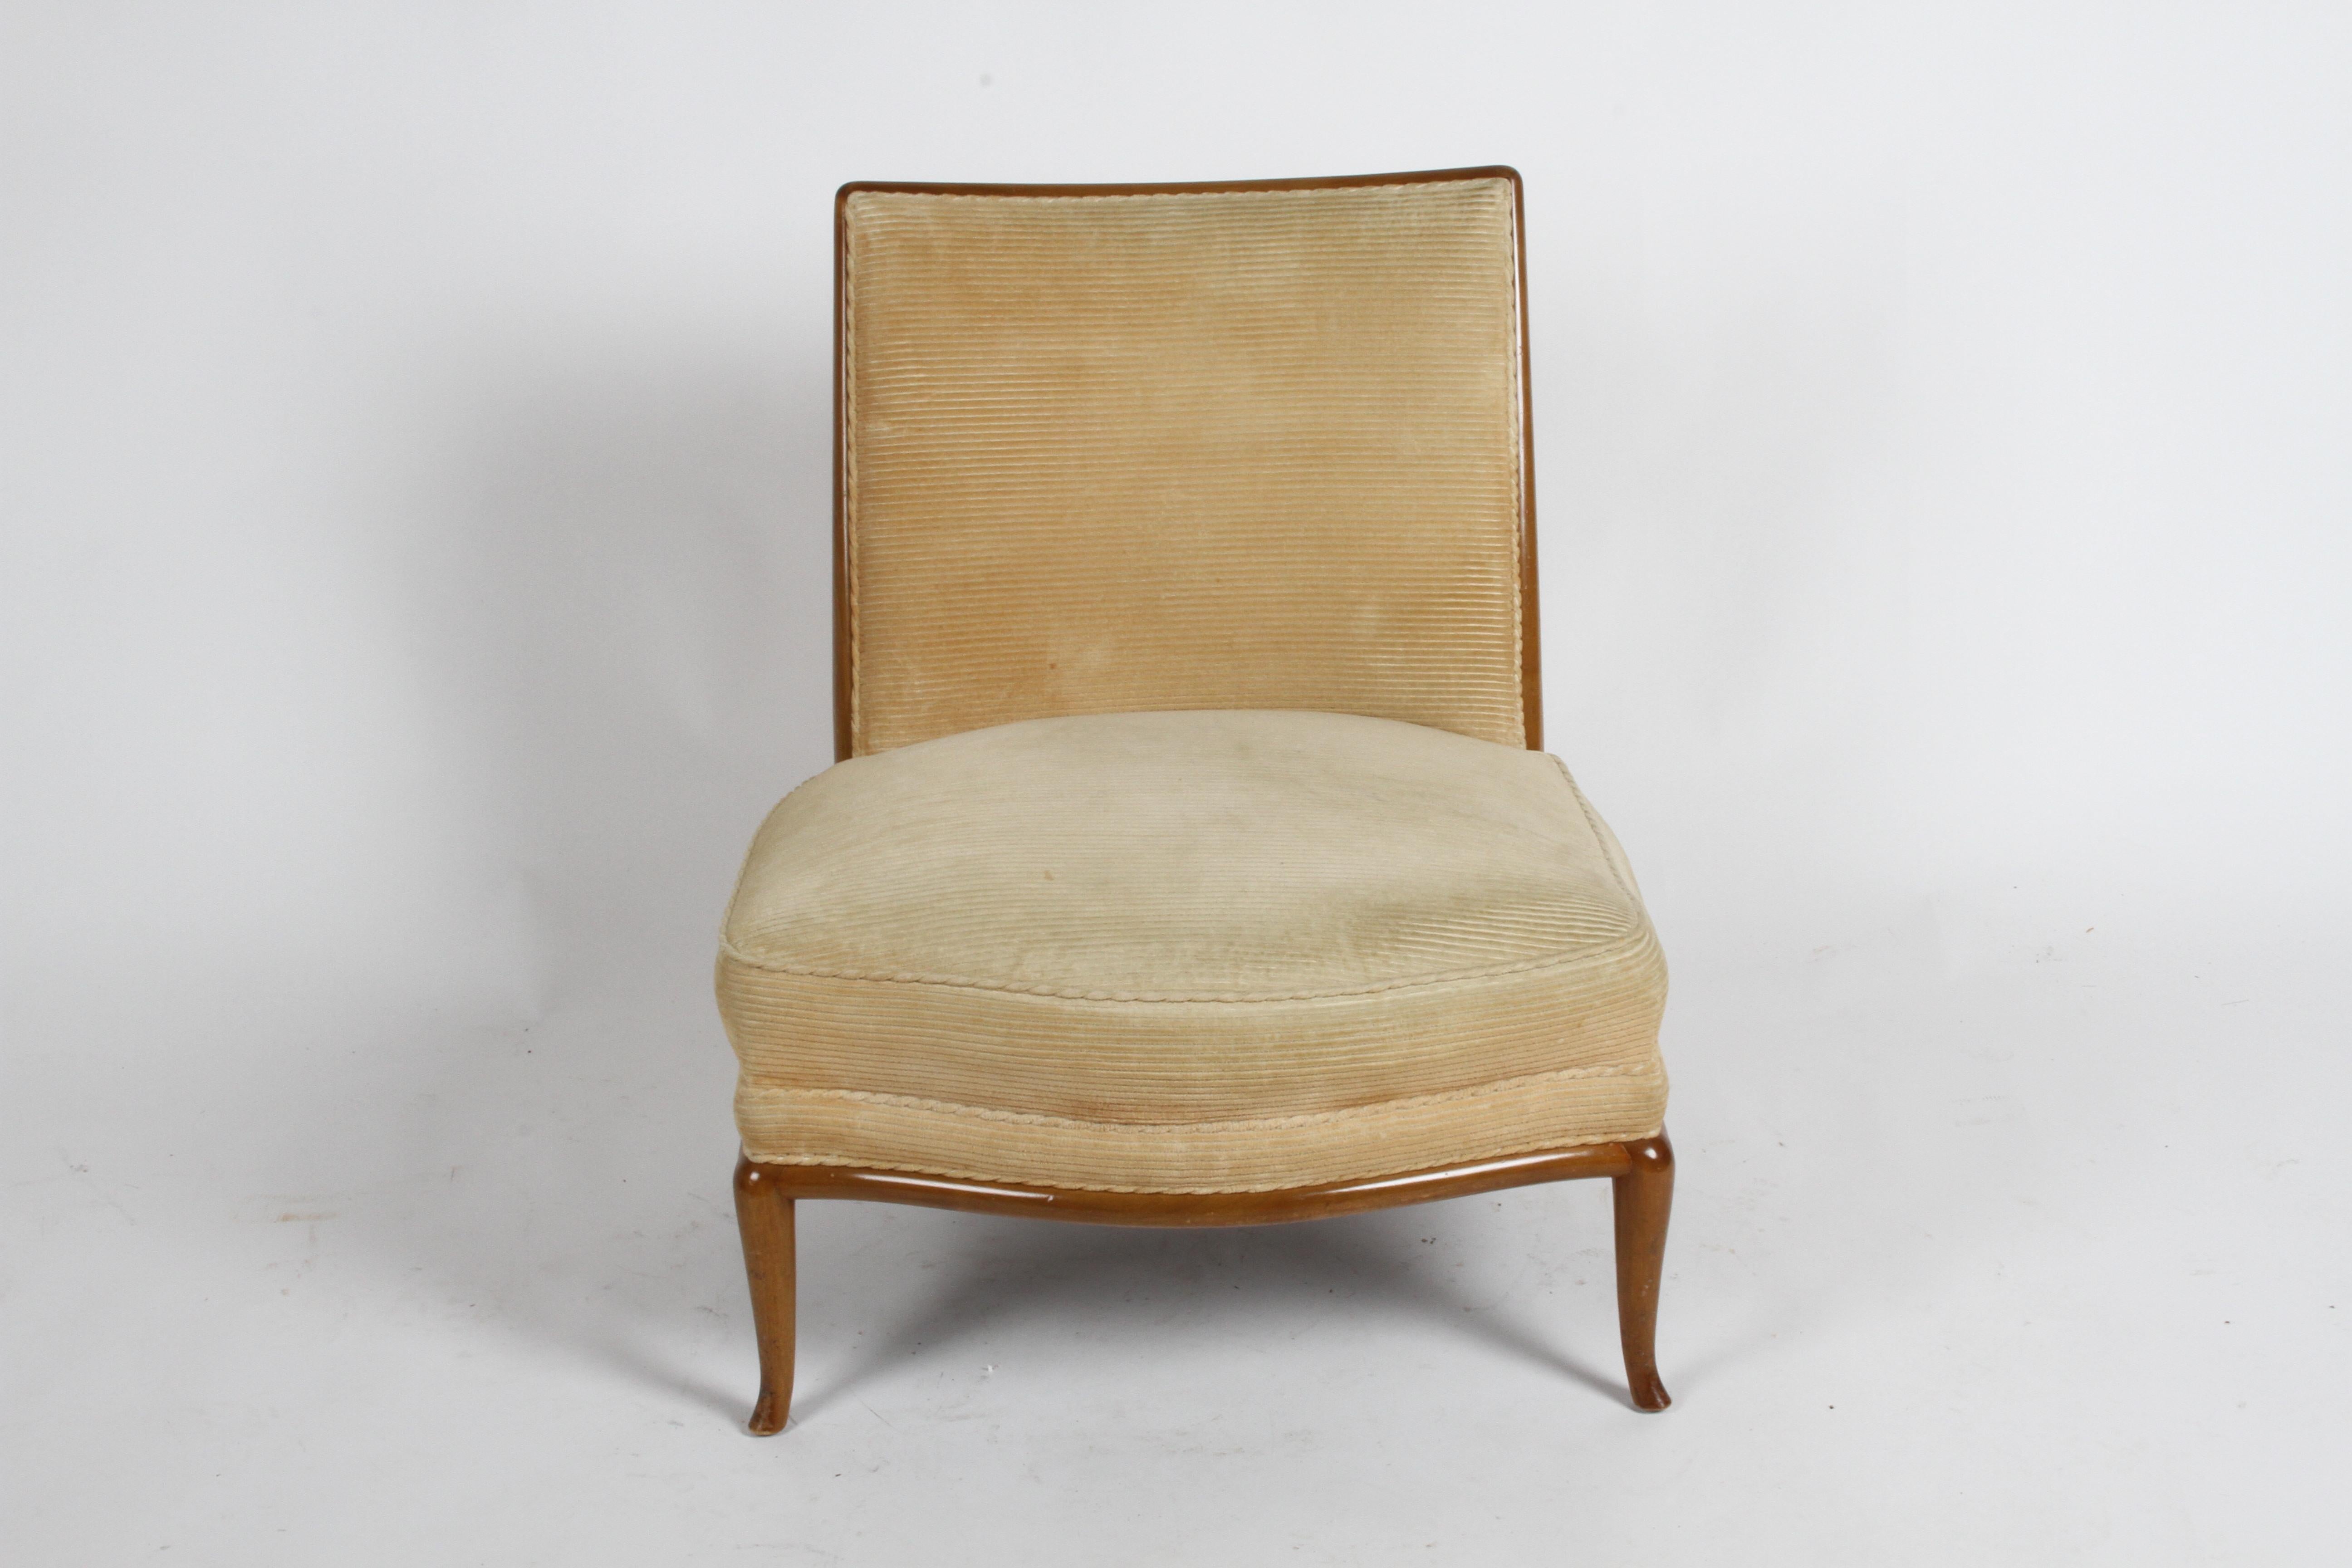 Beautiful French influenced design by T. H Robsjohn-Gibbings in original finish and re-upholstery. Serpentine front with elegant splayed legs on walnut frame, original finish shows scuffs. Price includes refinishing of wood, as original color or in